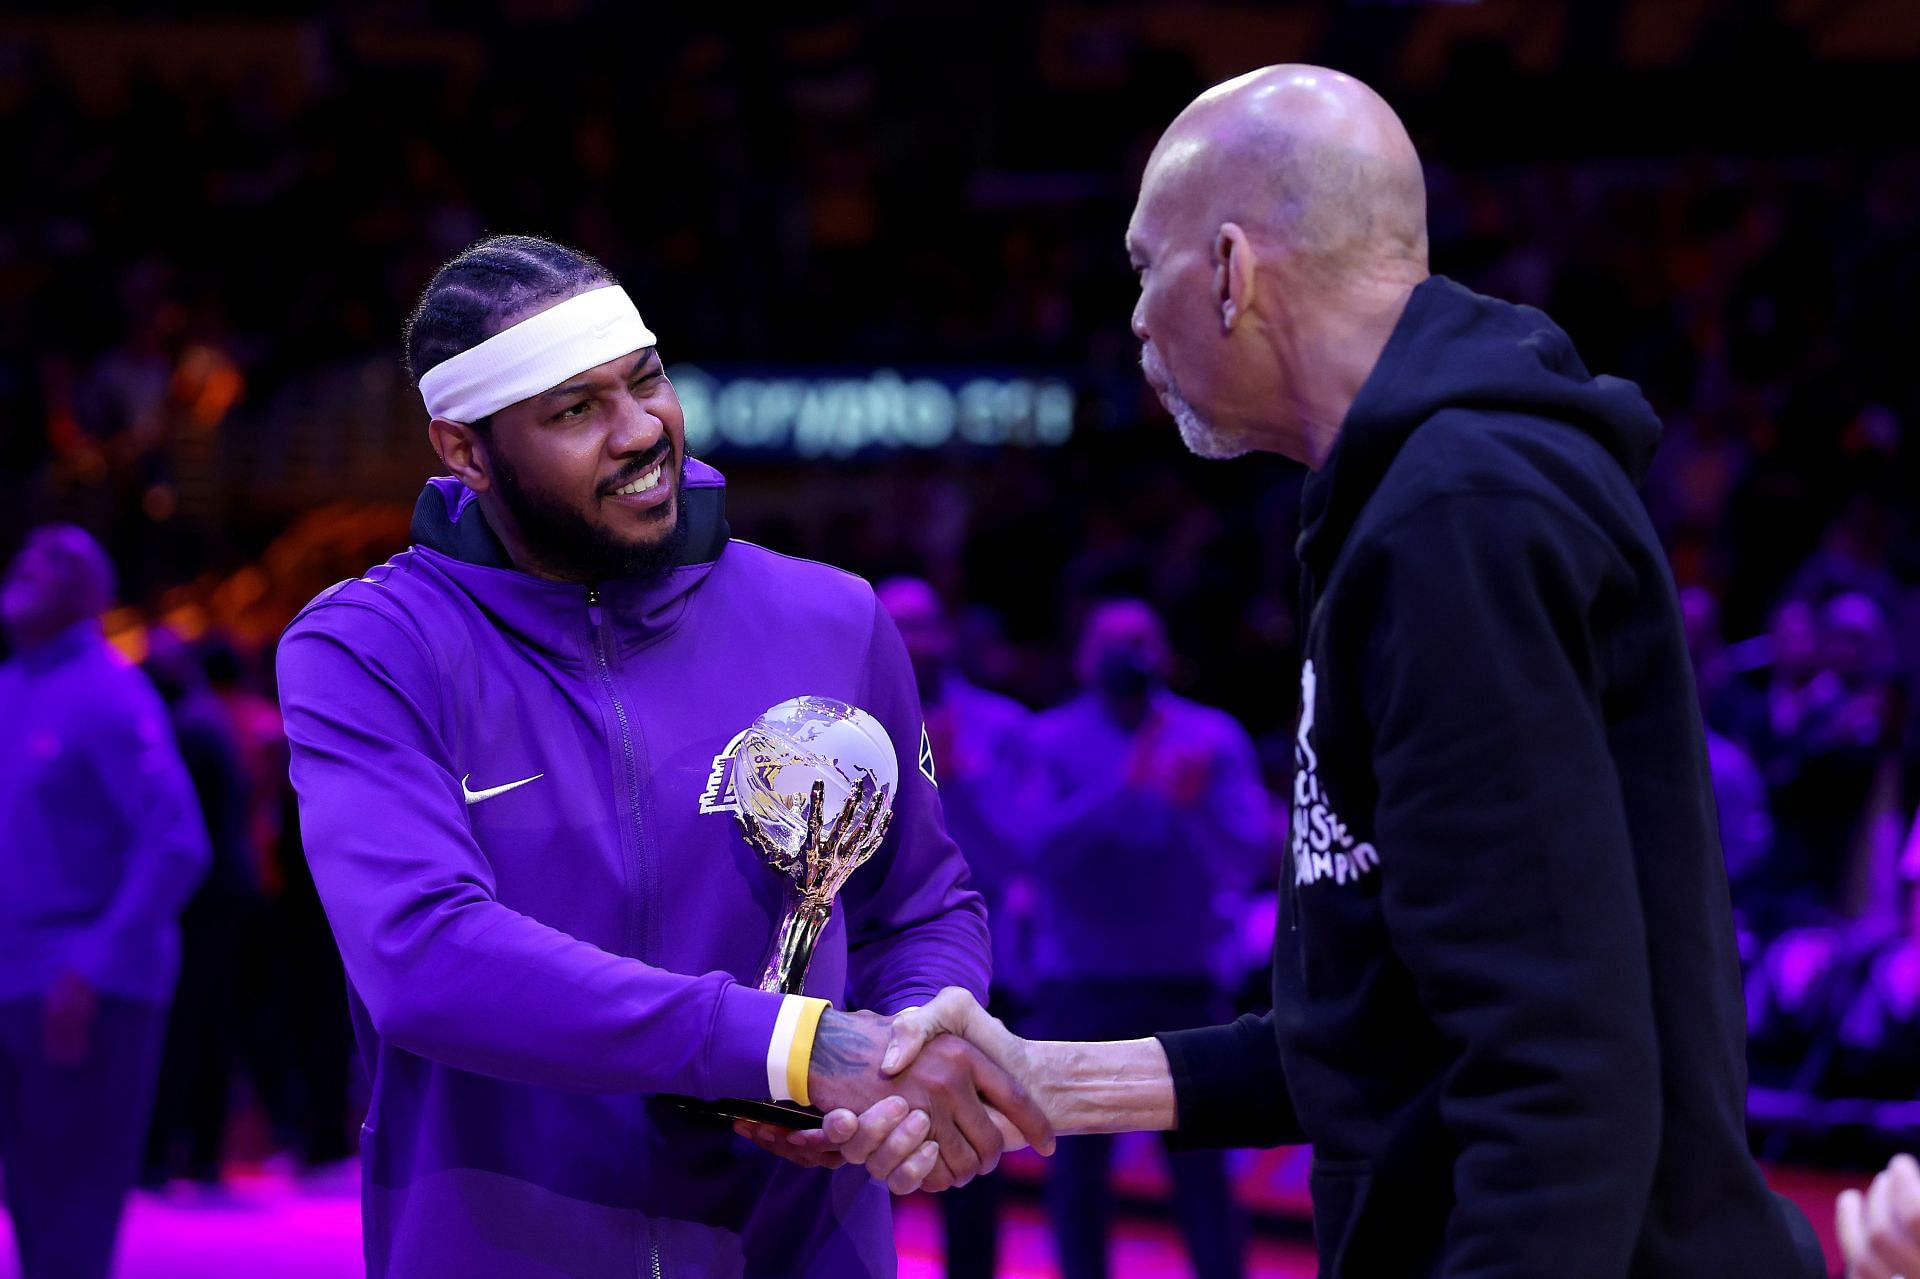 Carmelo Anthony was the first recipient of the Kareem Abdul-Jabbar Social Justice award.